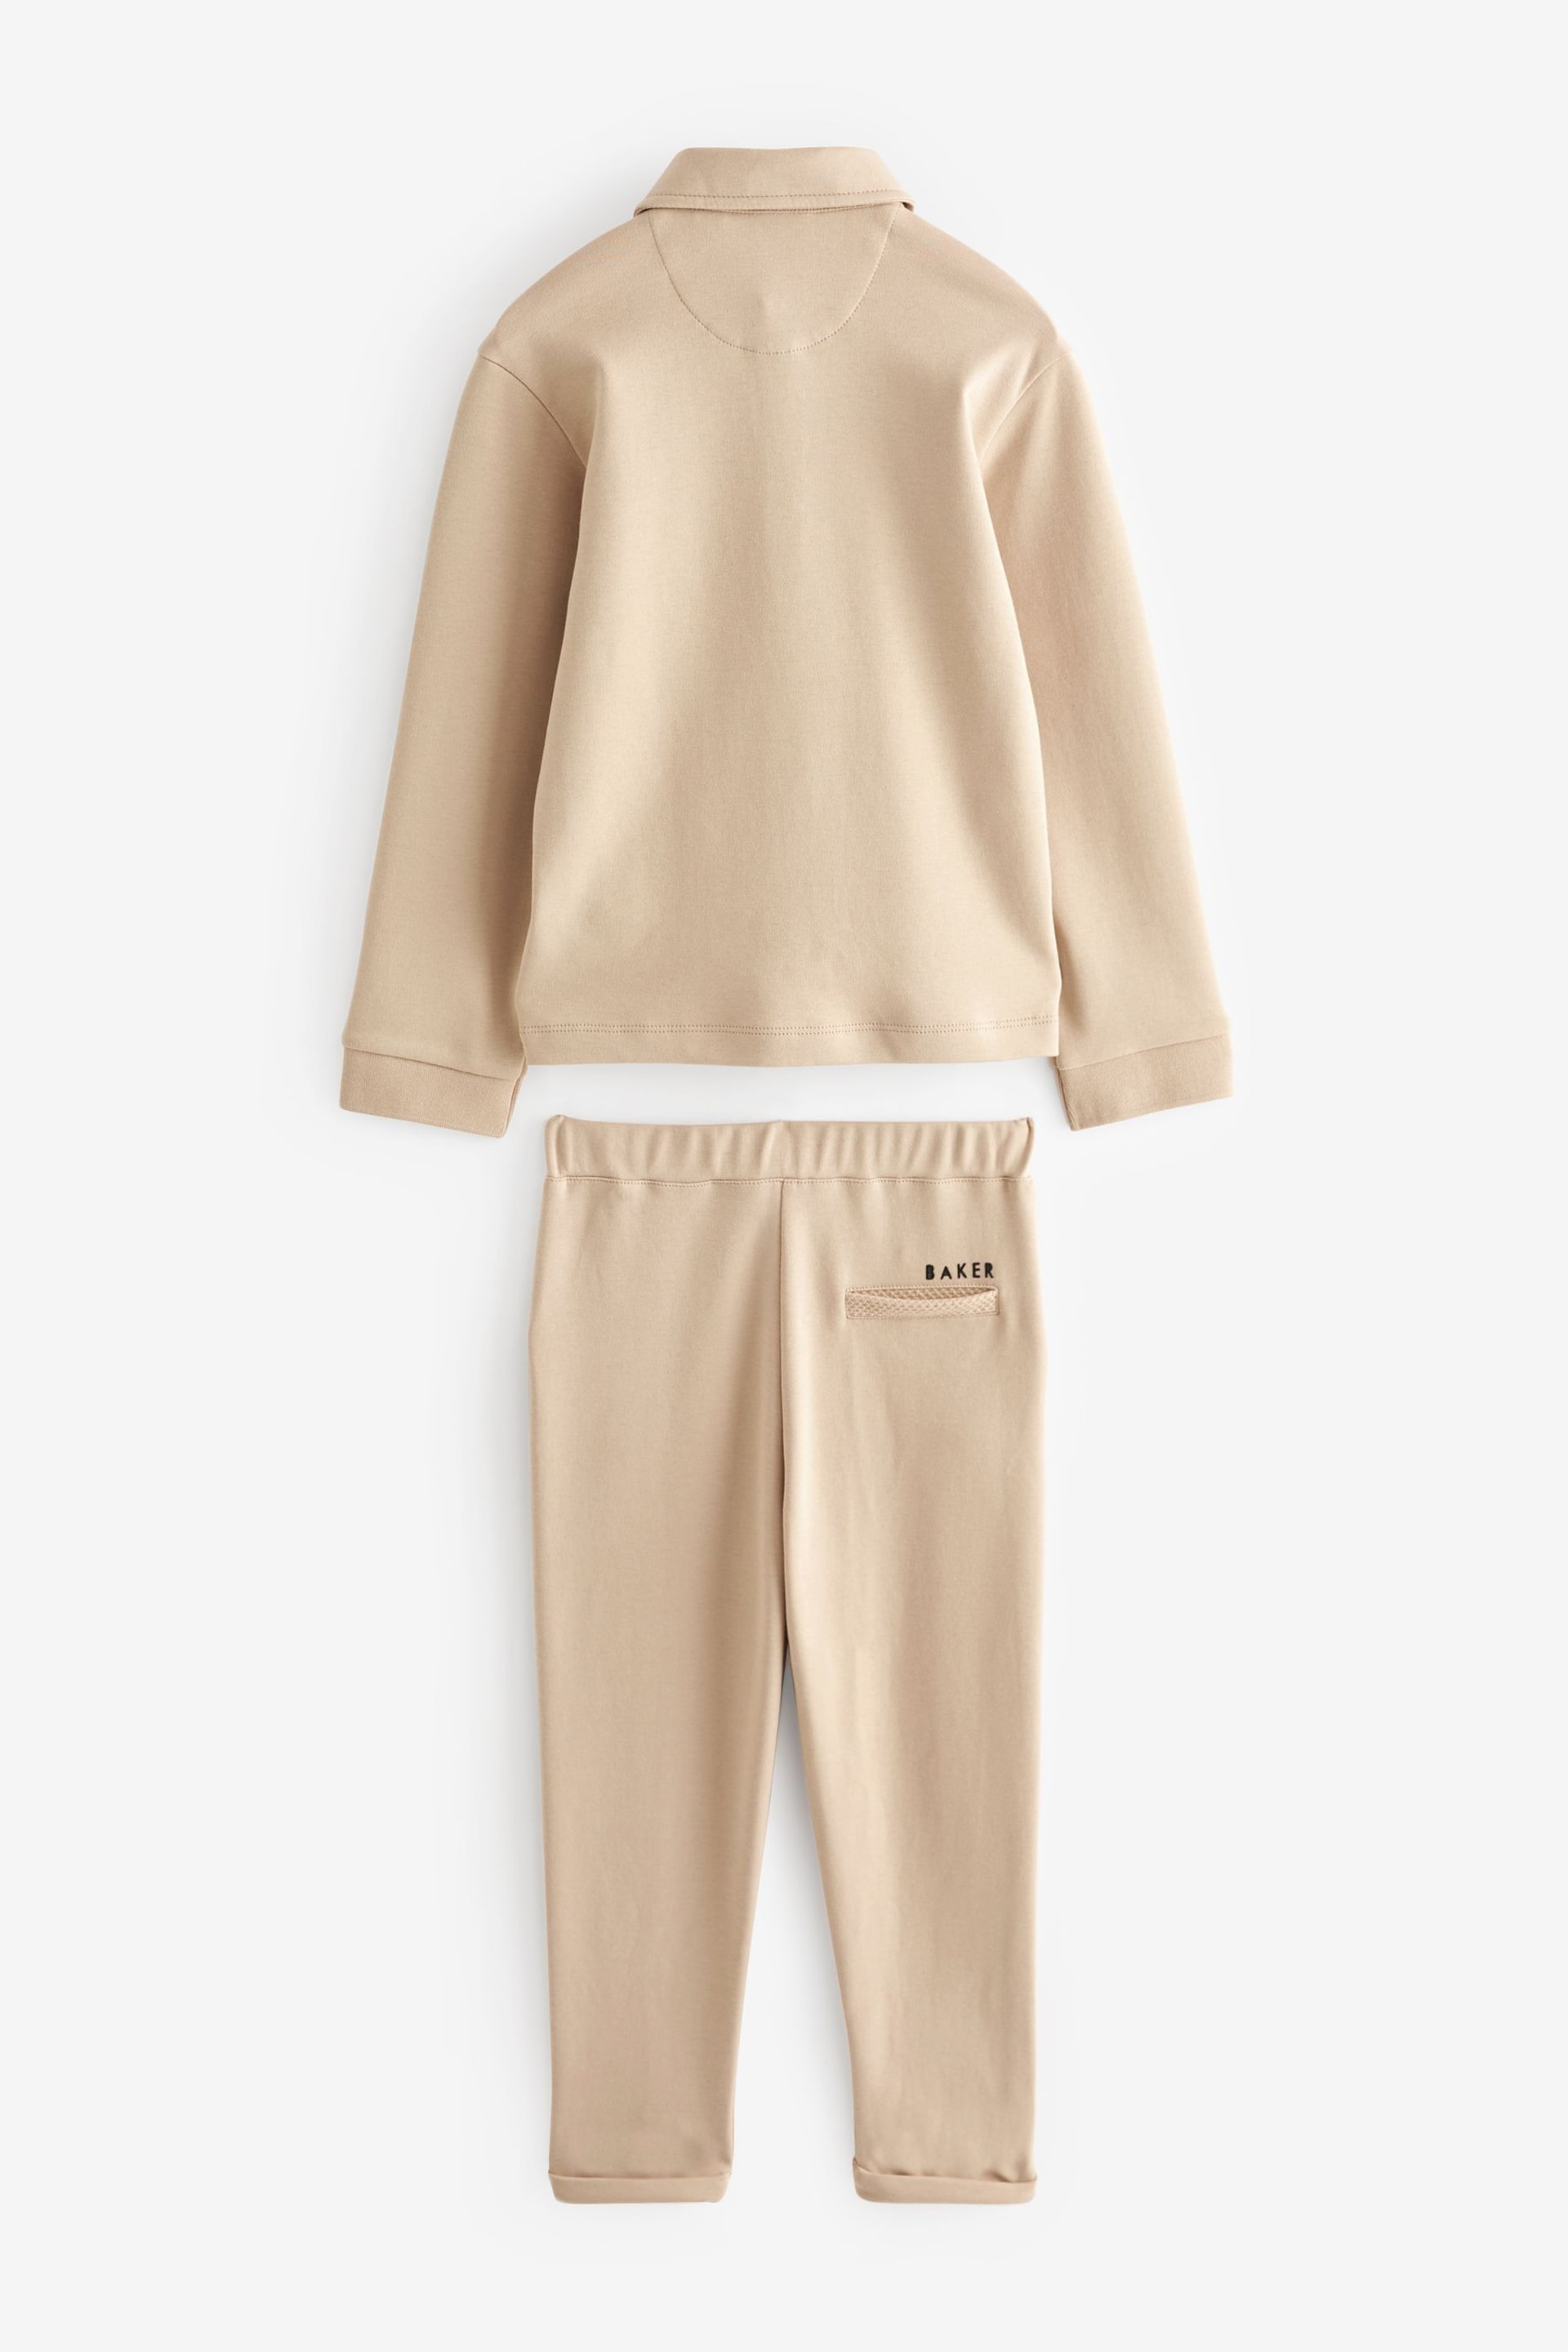 Baker by Ted Baker Textured Polo Shirt and Trousers Set - Image 9 of 11